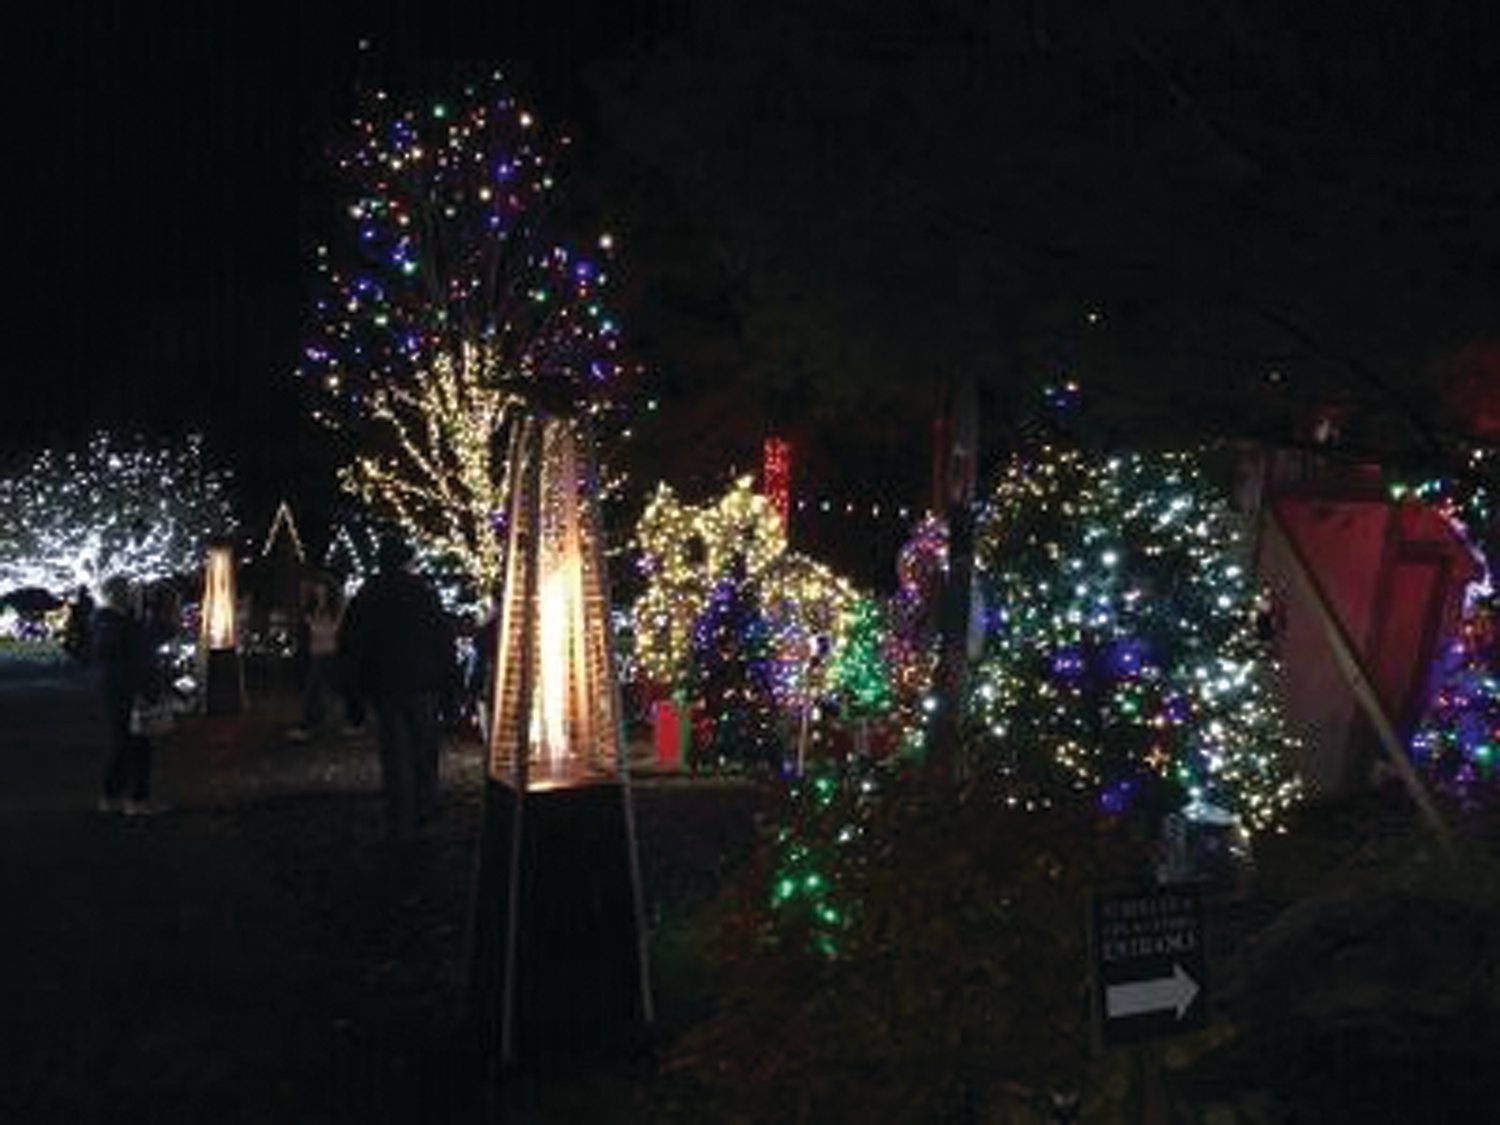 More than a million twinkling lights sparkle above the grounds of the Lehigh Valley Zoo in North Whitehall Township. The eighth annual Winter Light Spectacular is running for 35 nights until Jan. 1.